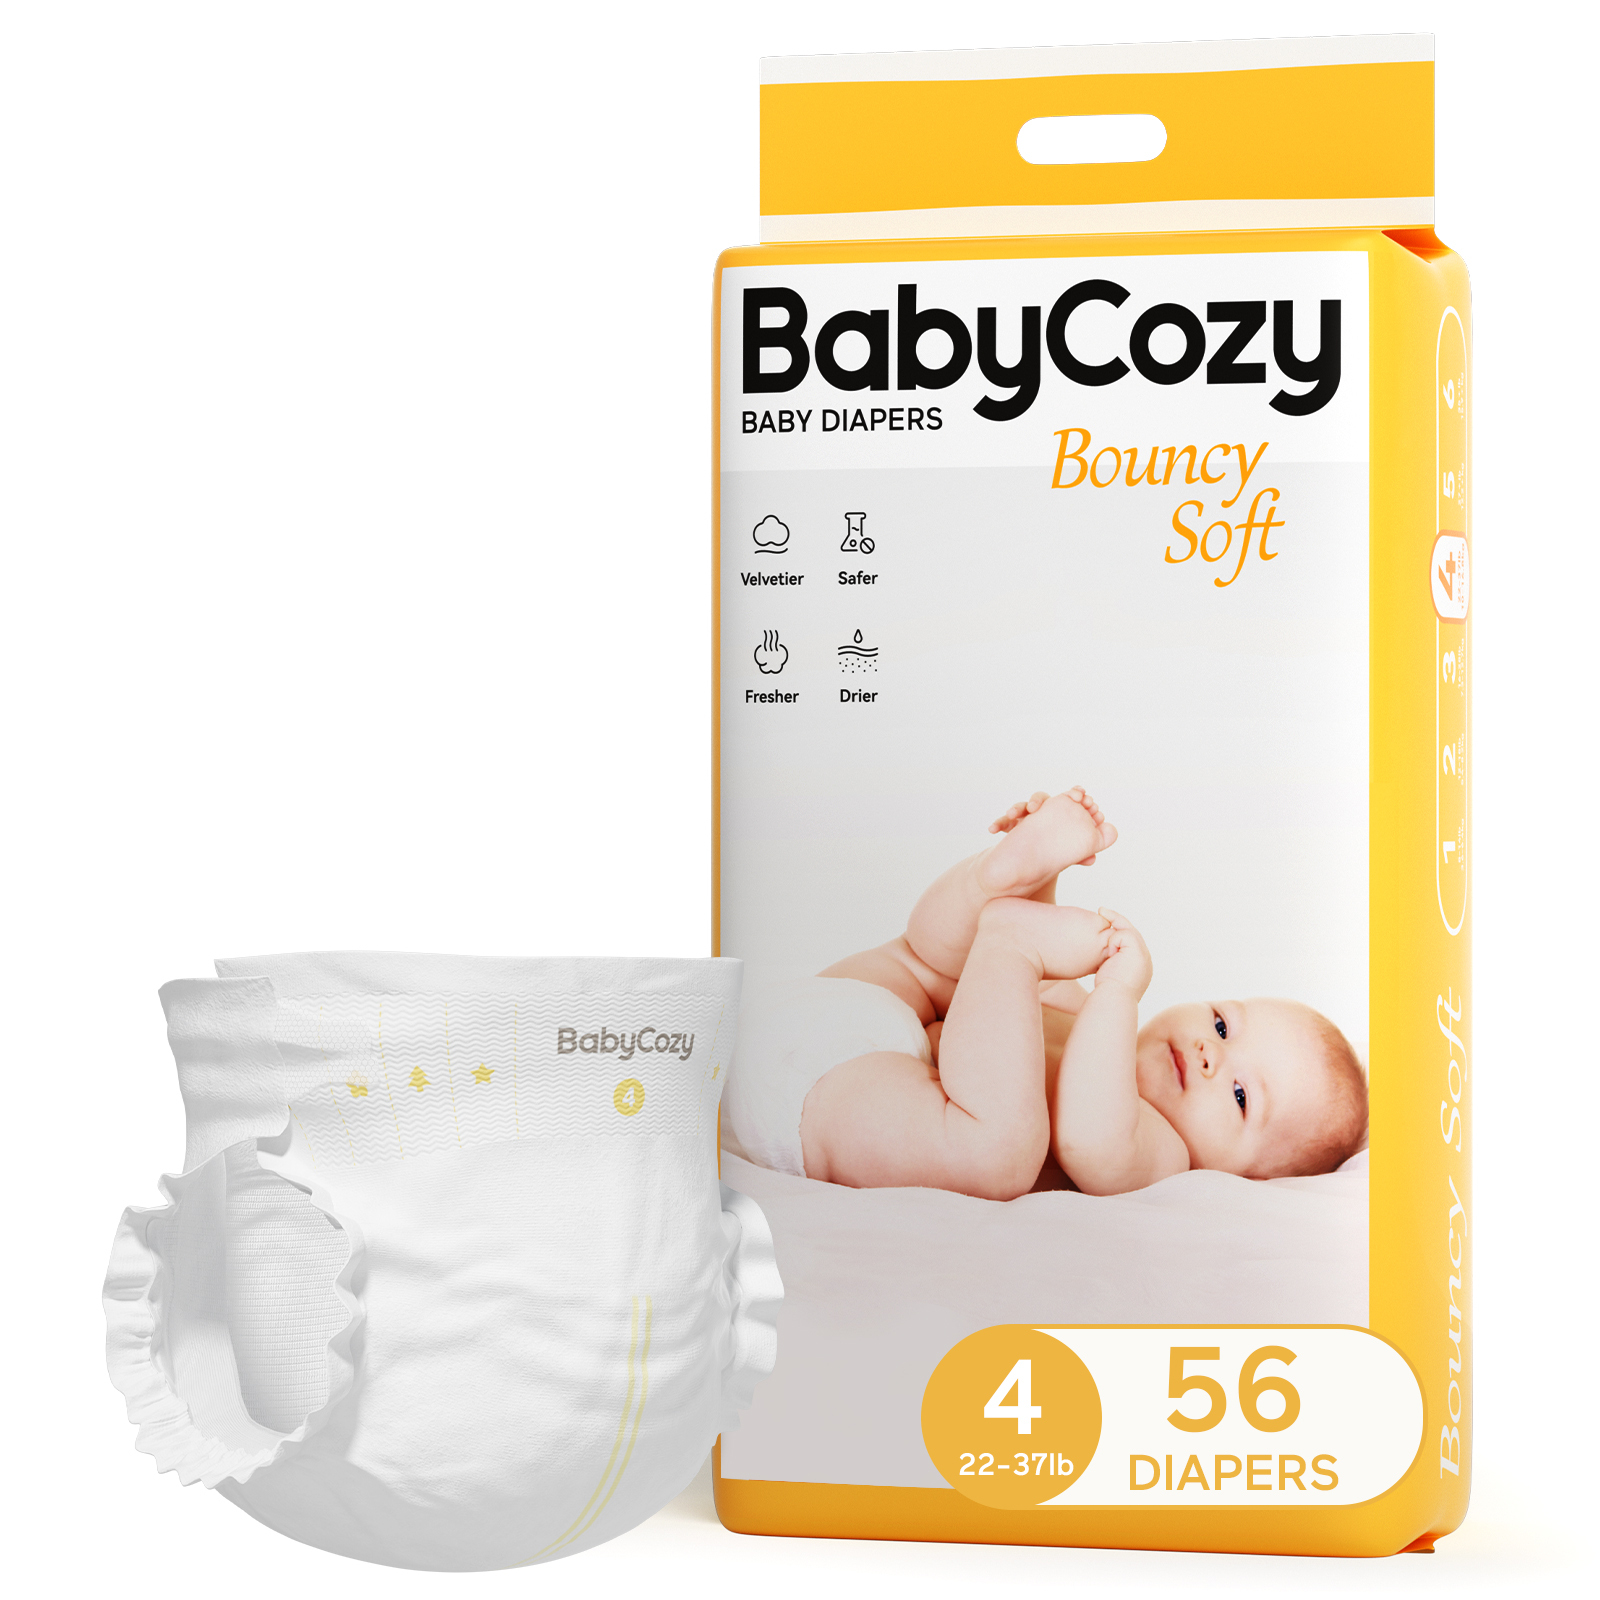 Babycozy Hypoallergenic Diapers Size 4, Baby Dry Disposable Diapers 56 Count - image 1 of 10